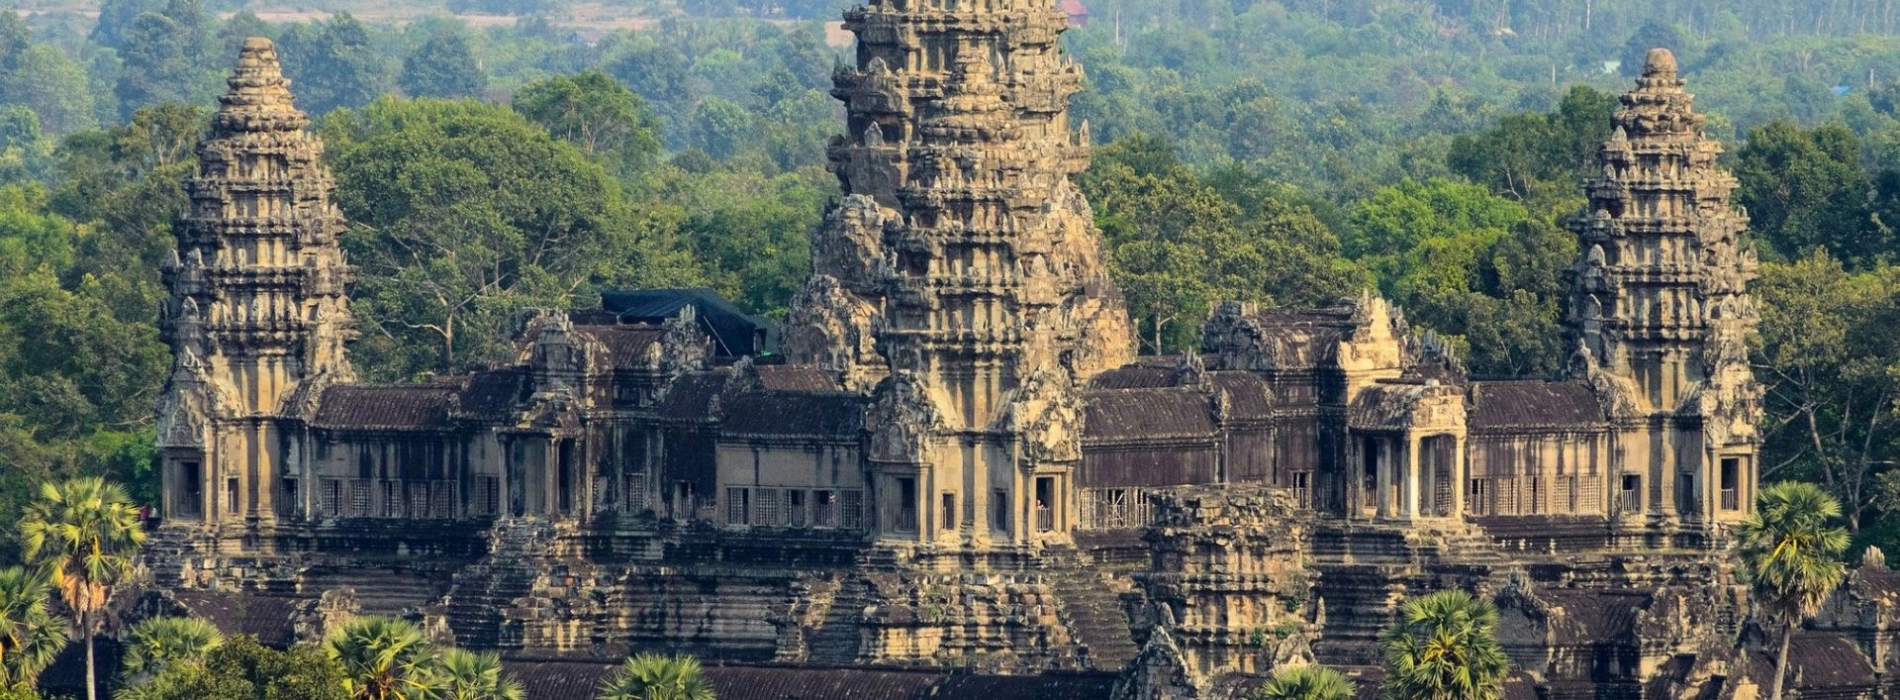 Cambodia travel guide: Everything you need to know